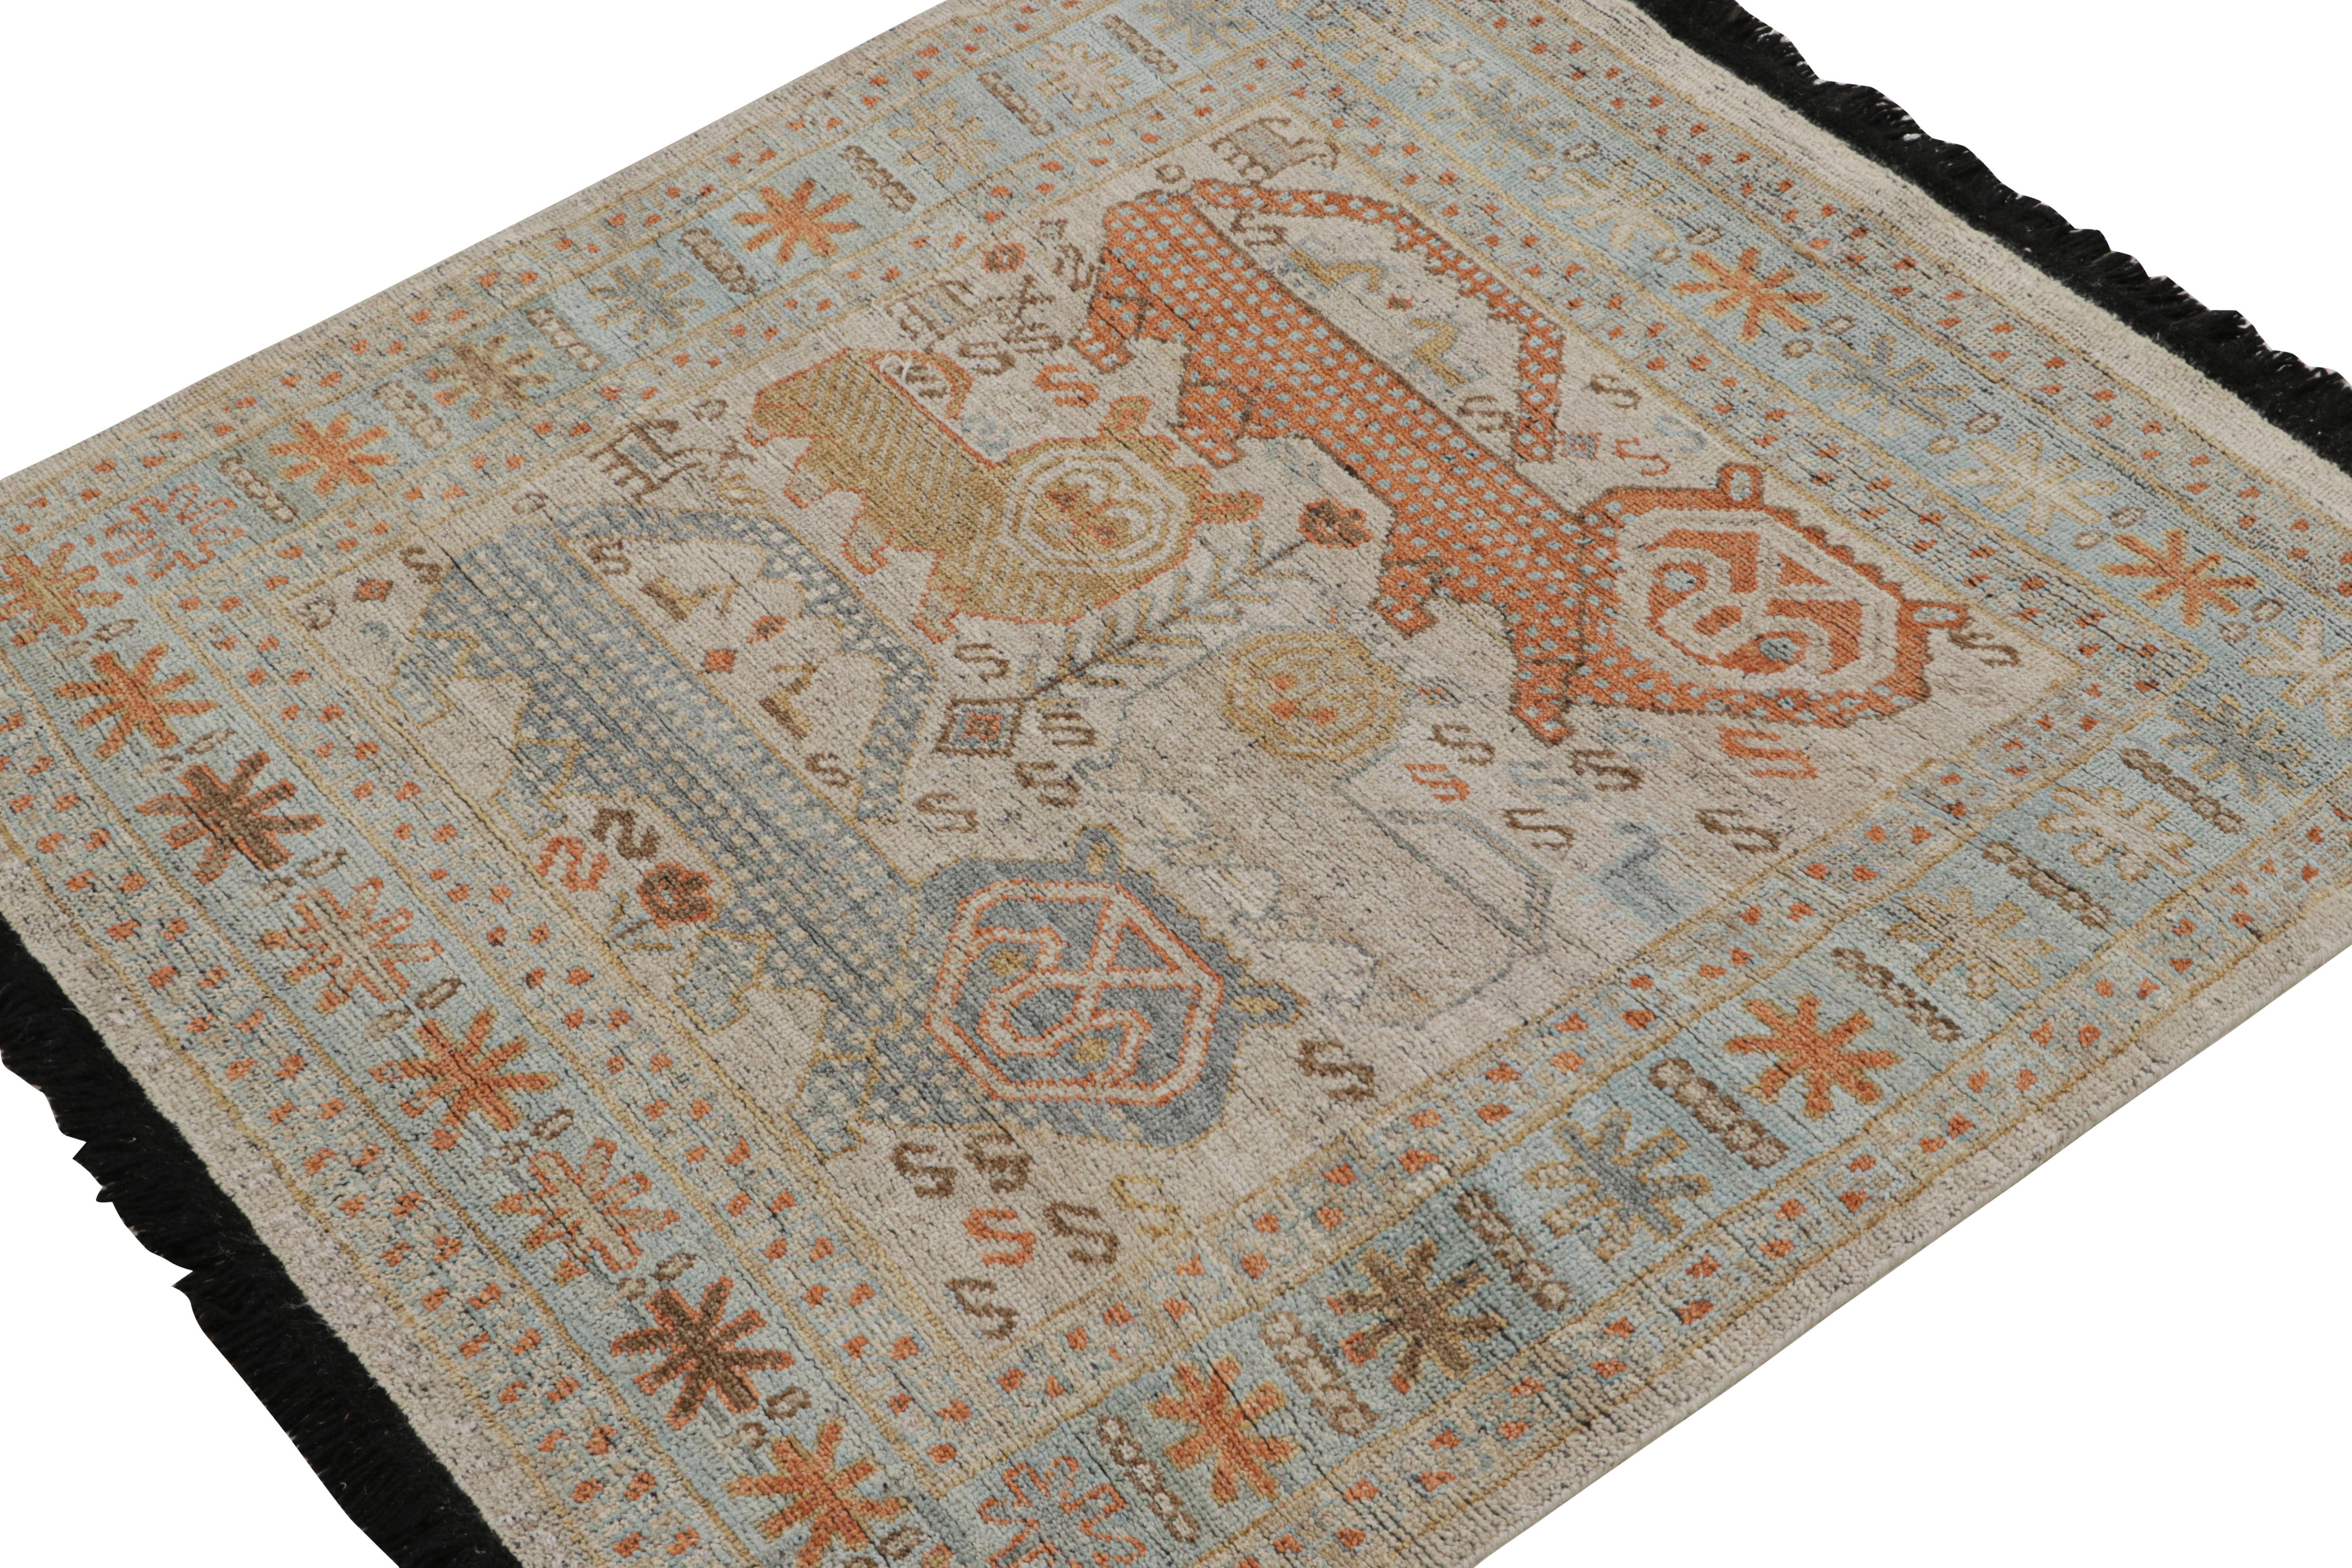 This 4x4 rug is a new addition to the Burano Collection by Rug & Kilim. Hand-knotted in wool, its design explores Caucasian tribal rug aesthetics in a refreshing modern quality.

On the Design: 

The design draws on tribal animal pictorials in warm